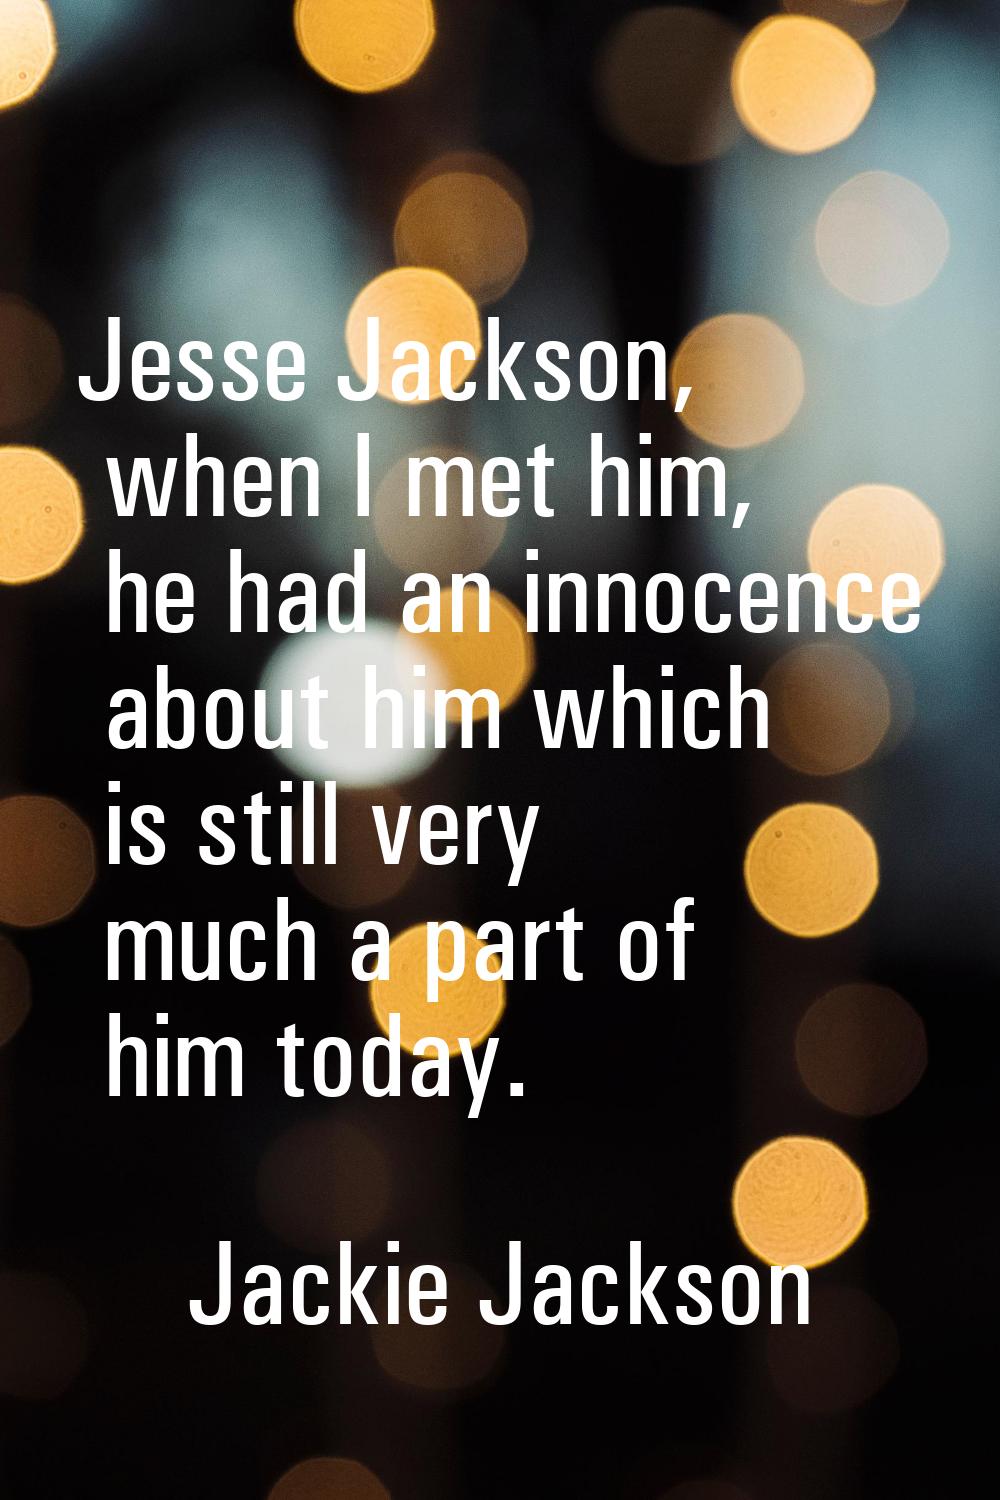 Jesse Jackson, when I met him, he had an innocence about him which is still very much a part of him